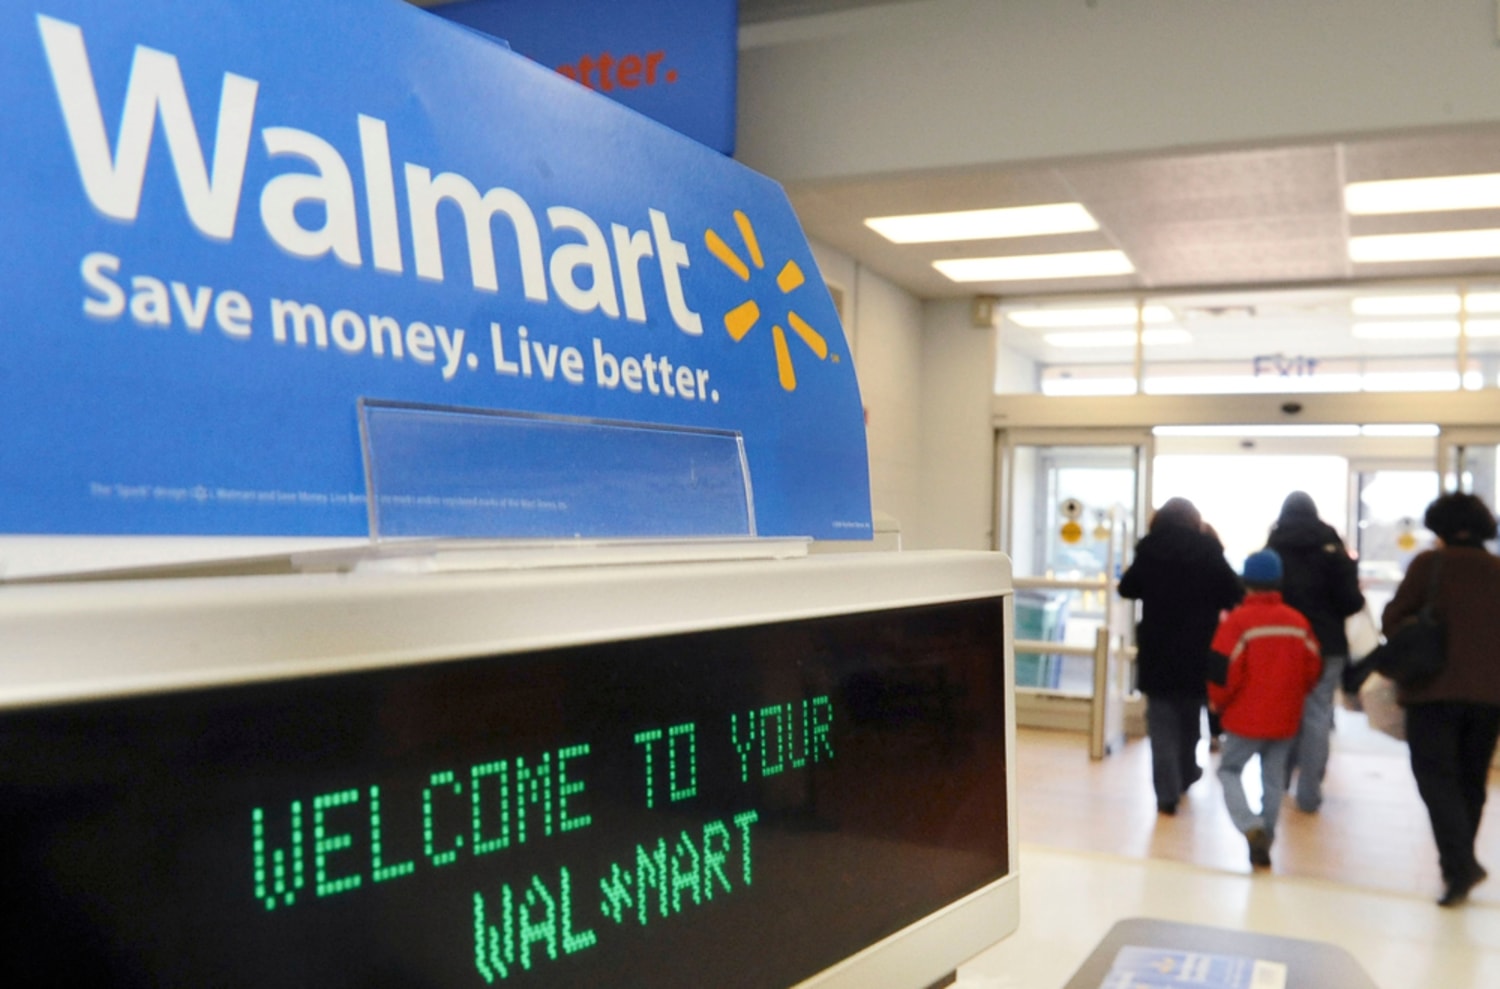 Walmart is rolling out sleek new store designs